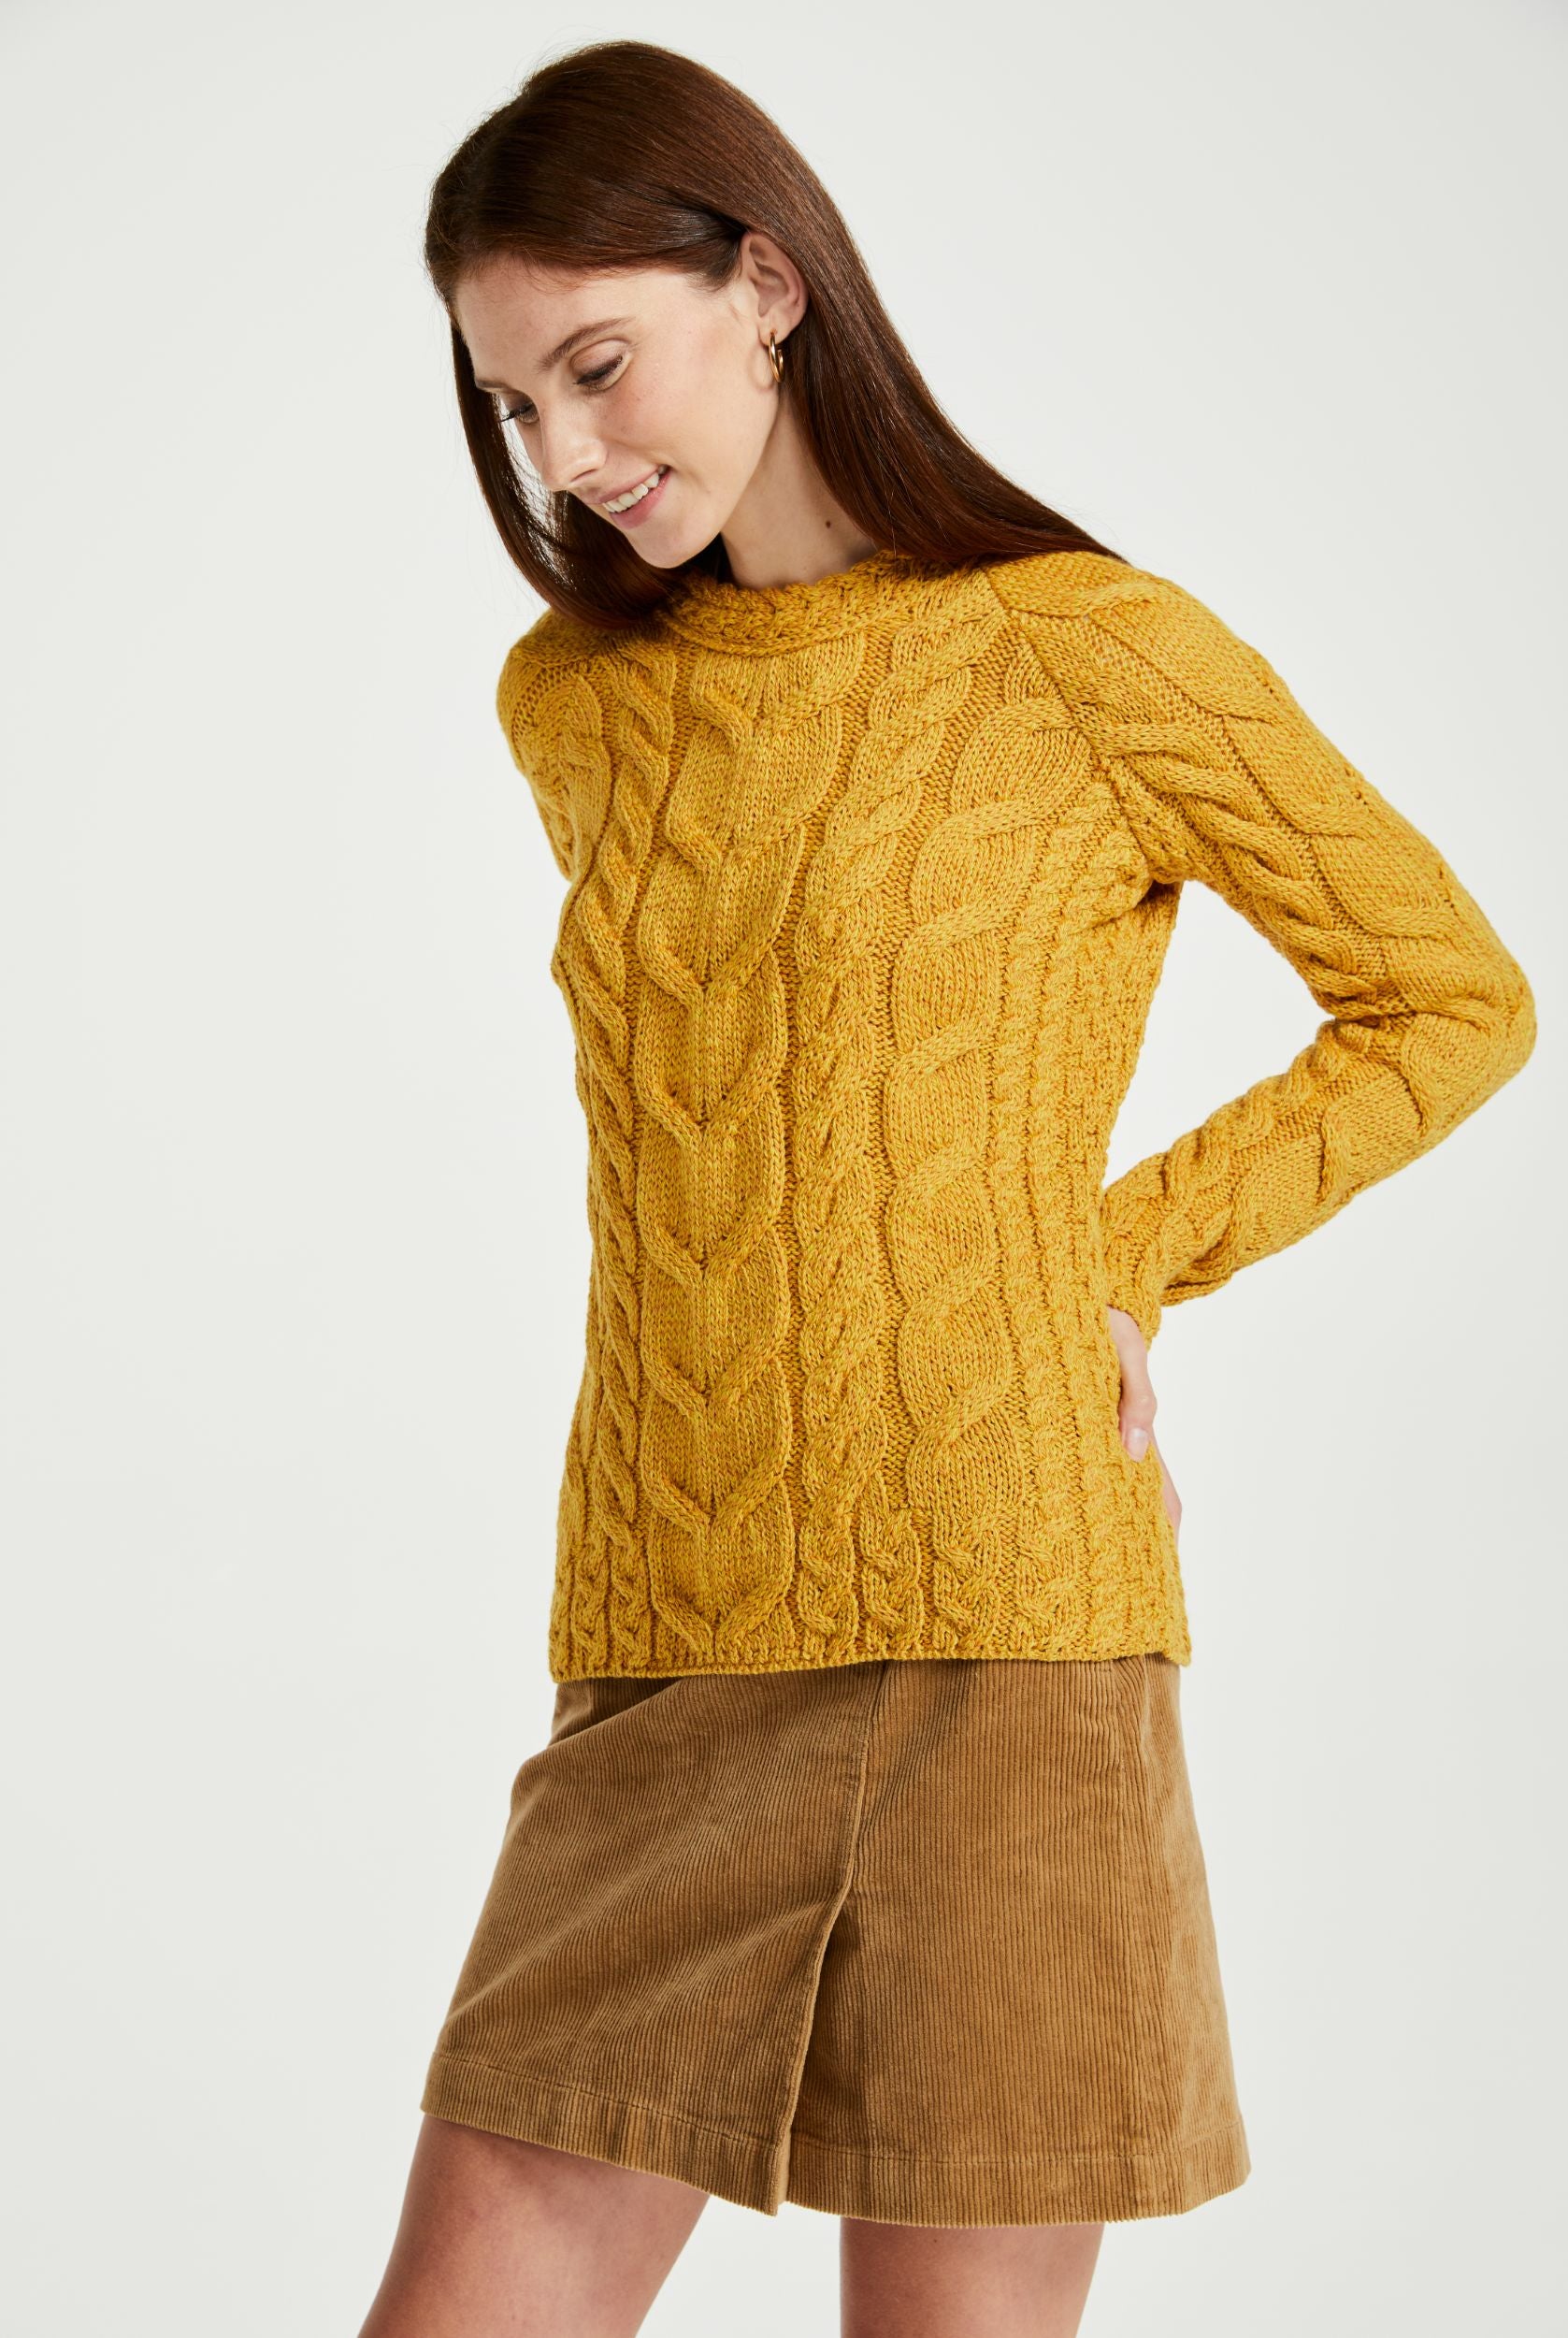 Women's Yellow Jumpers, Super Soft Jumpers